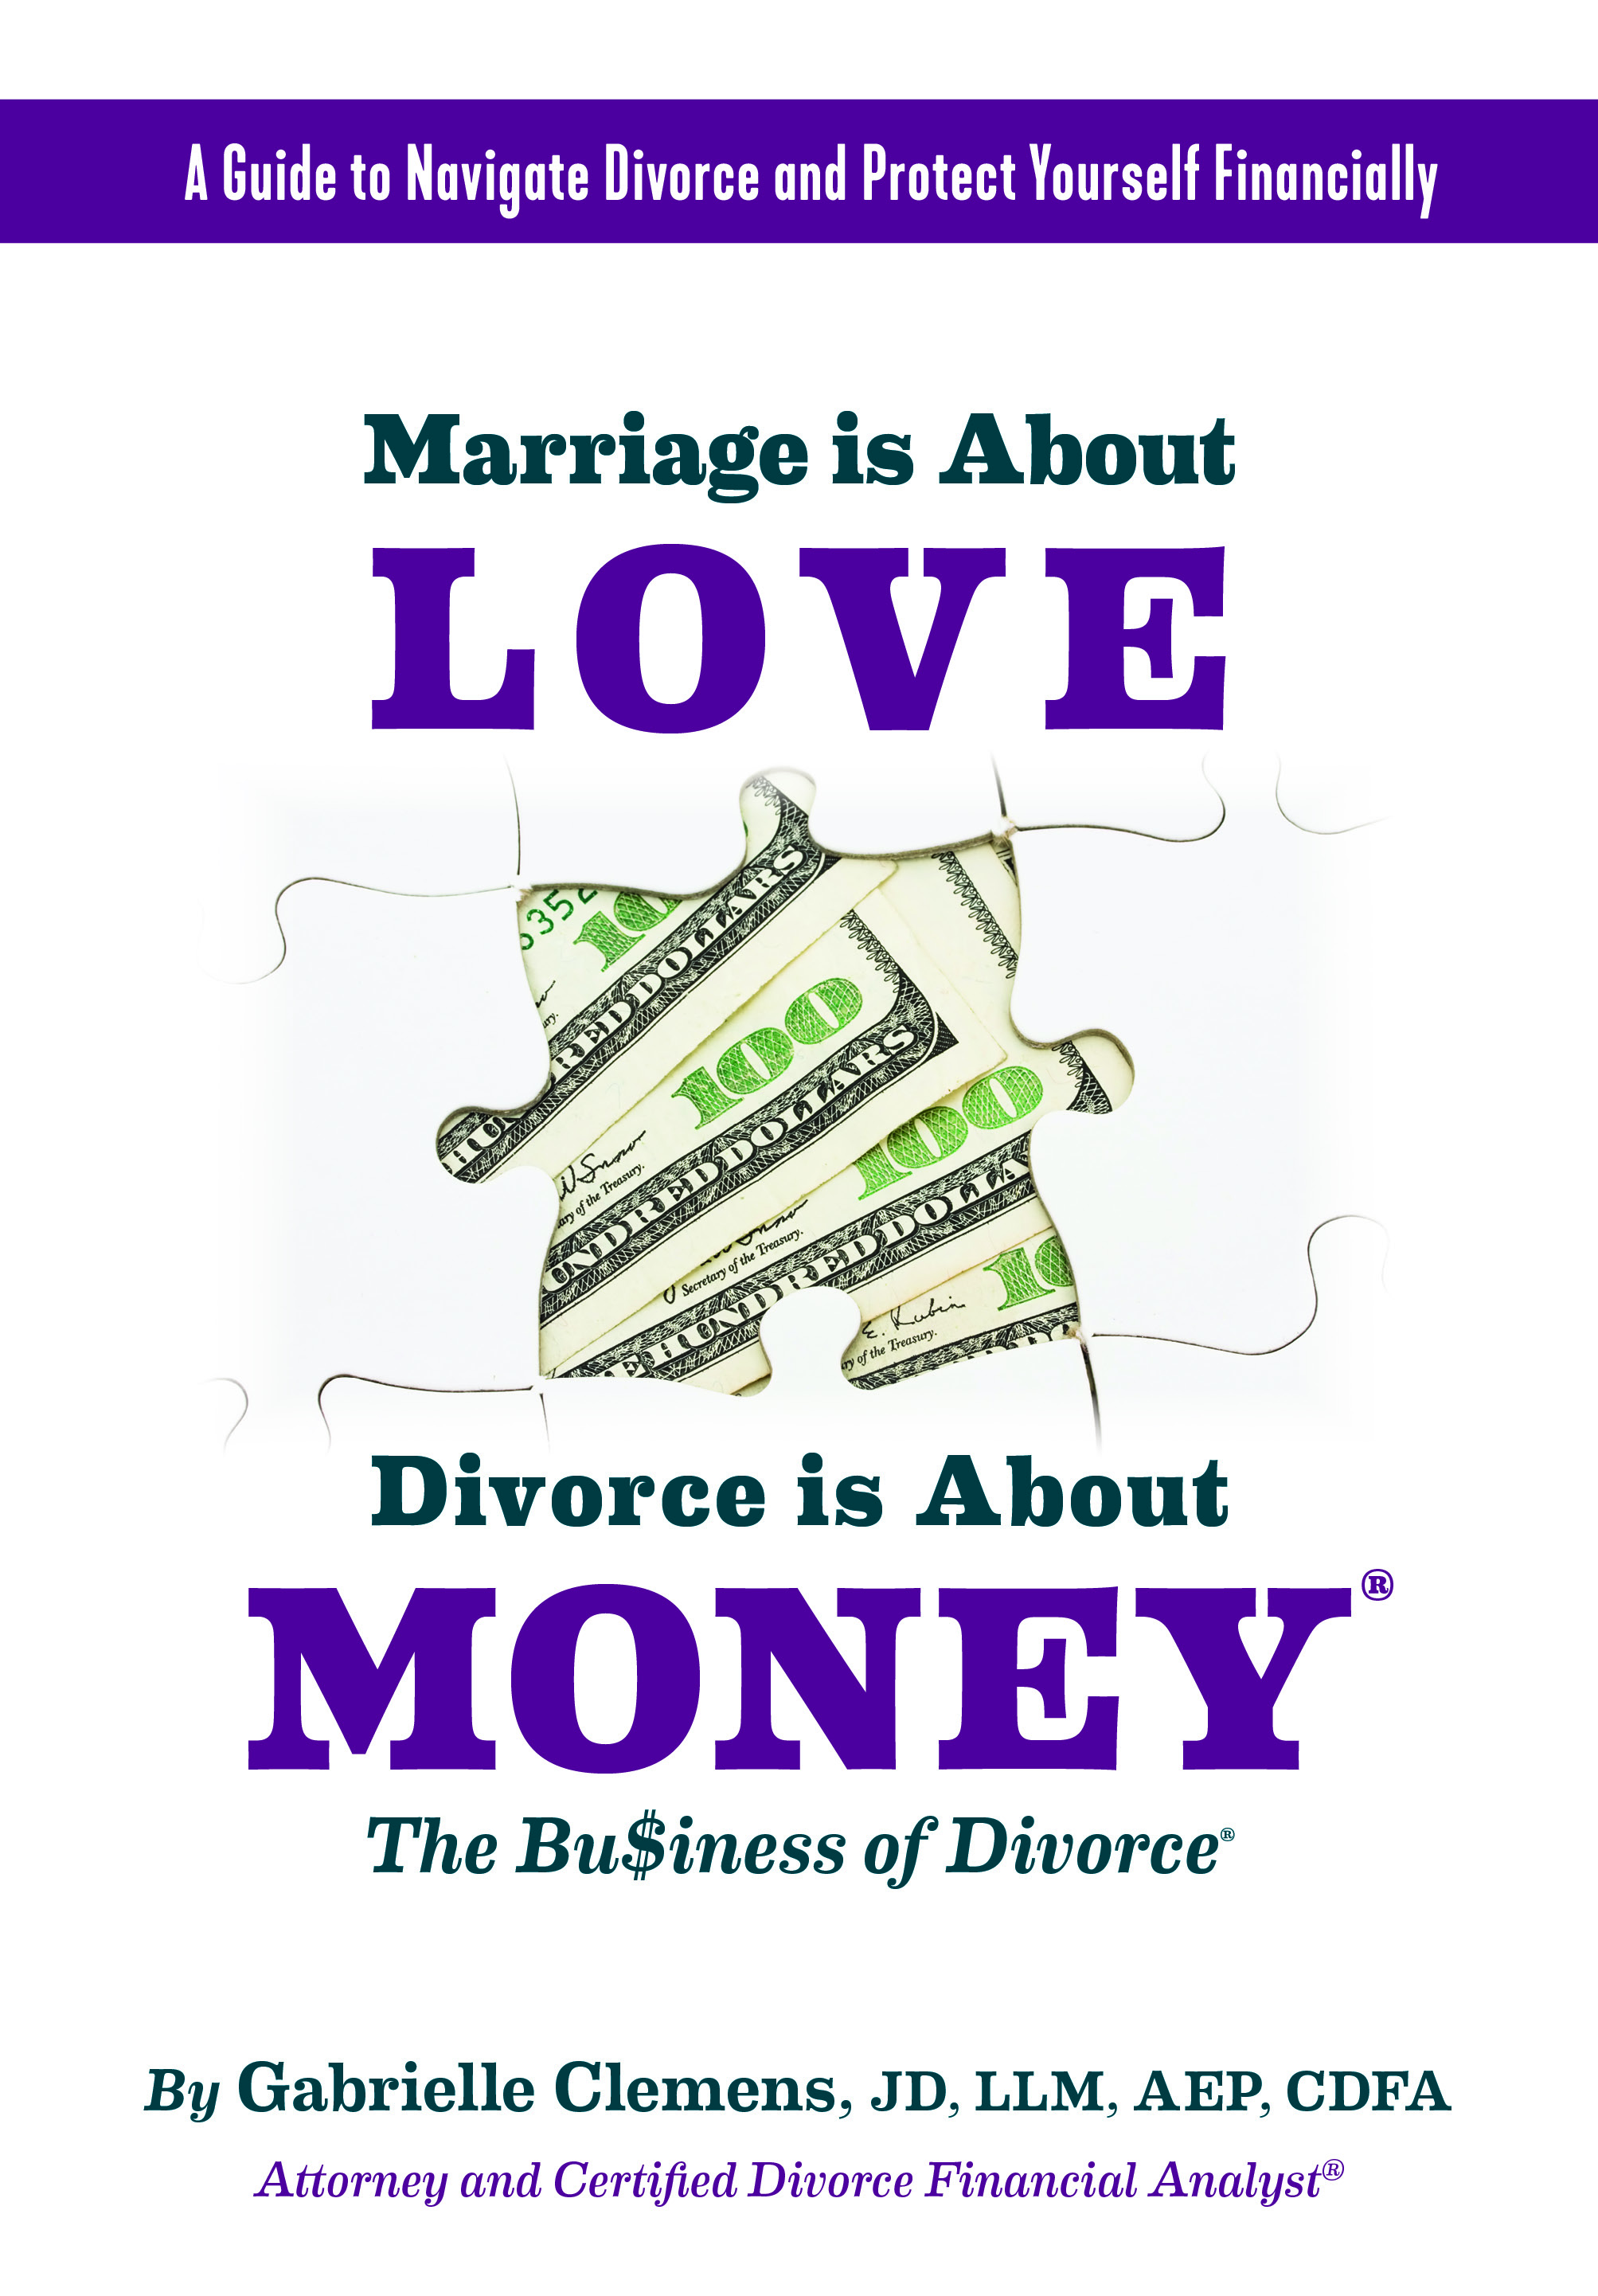 Expert Divorce Attorney and Financial Advisor Gabrielle Clemens Launches Podcast "Marriage Is About Love, Divorce Is About Money"